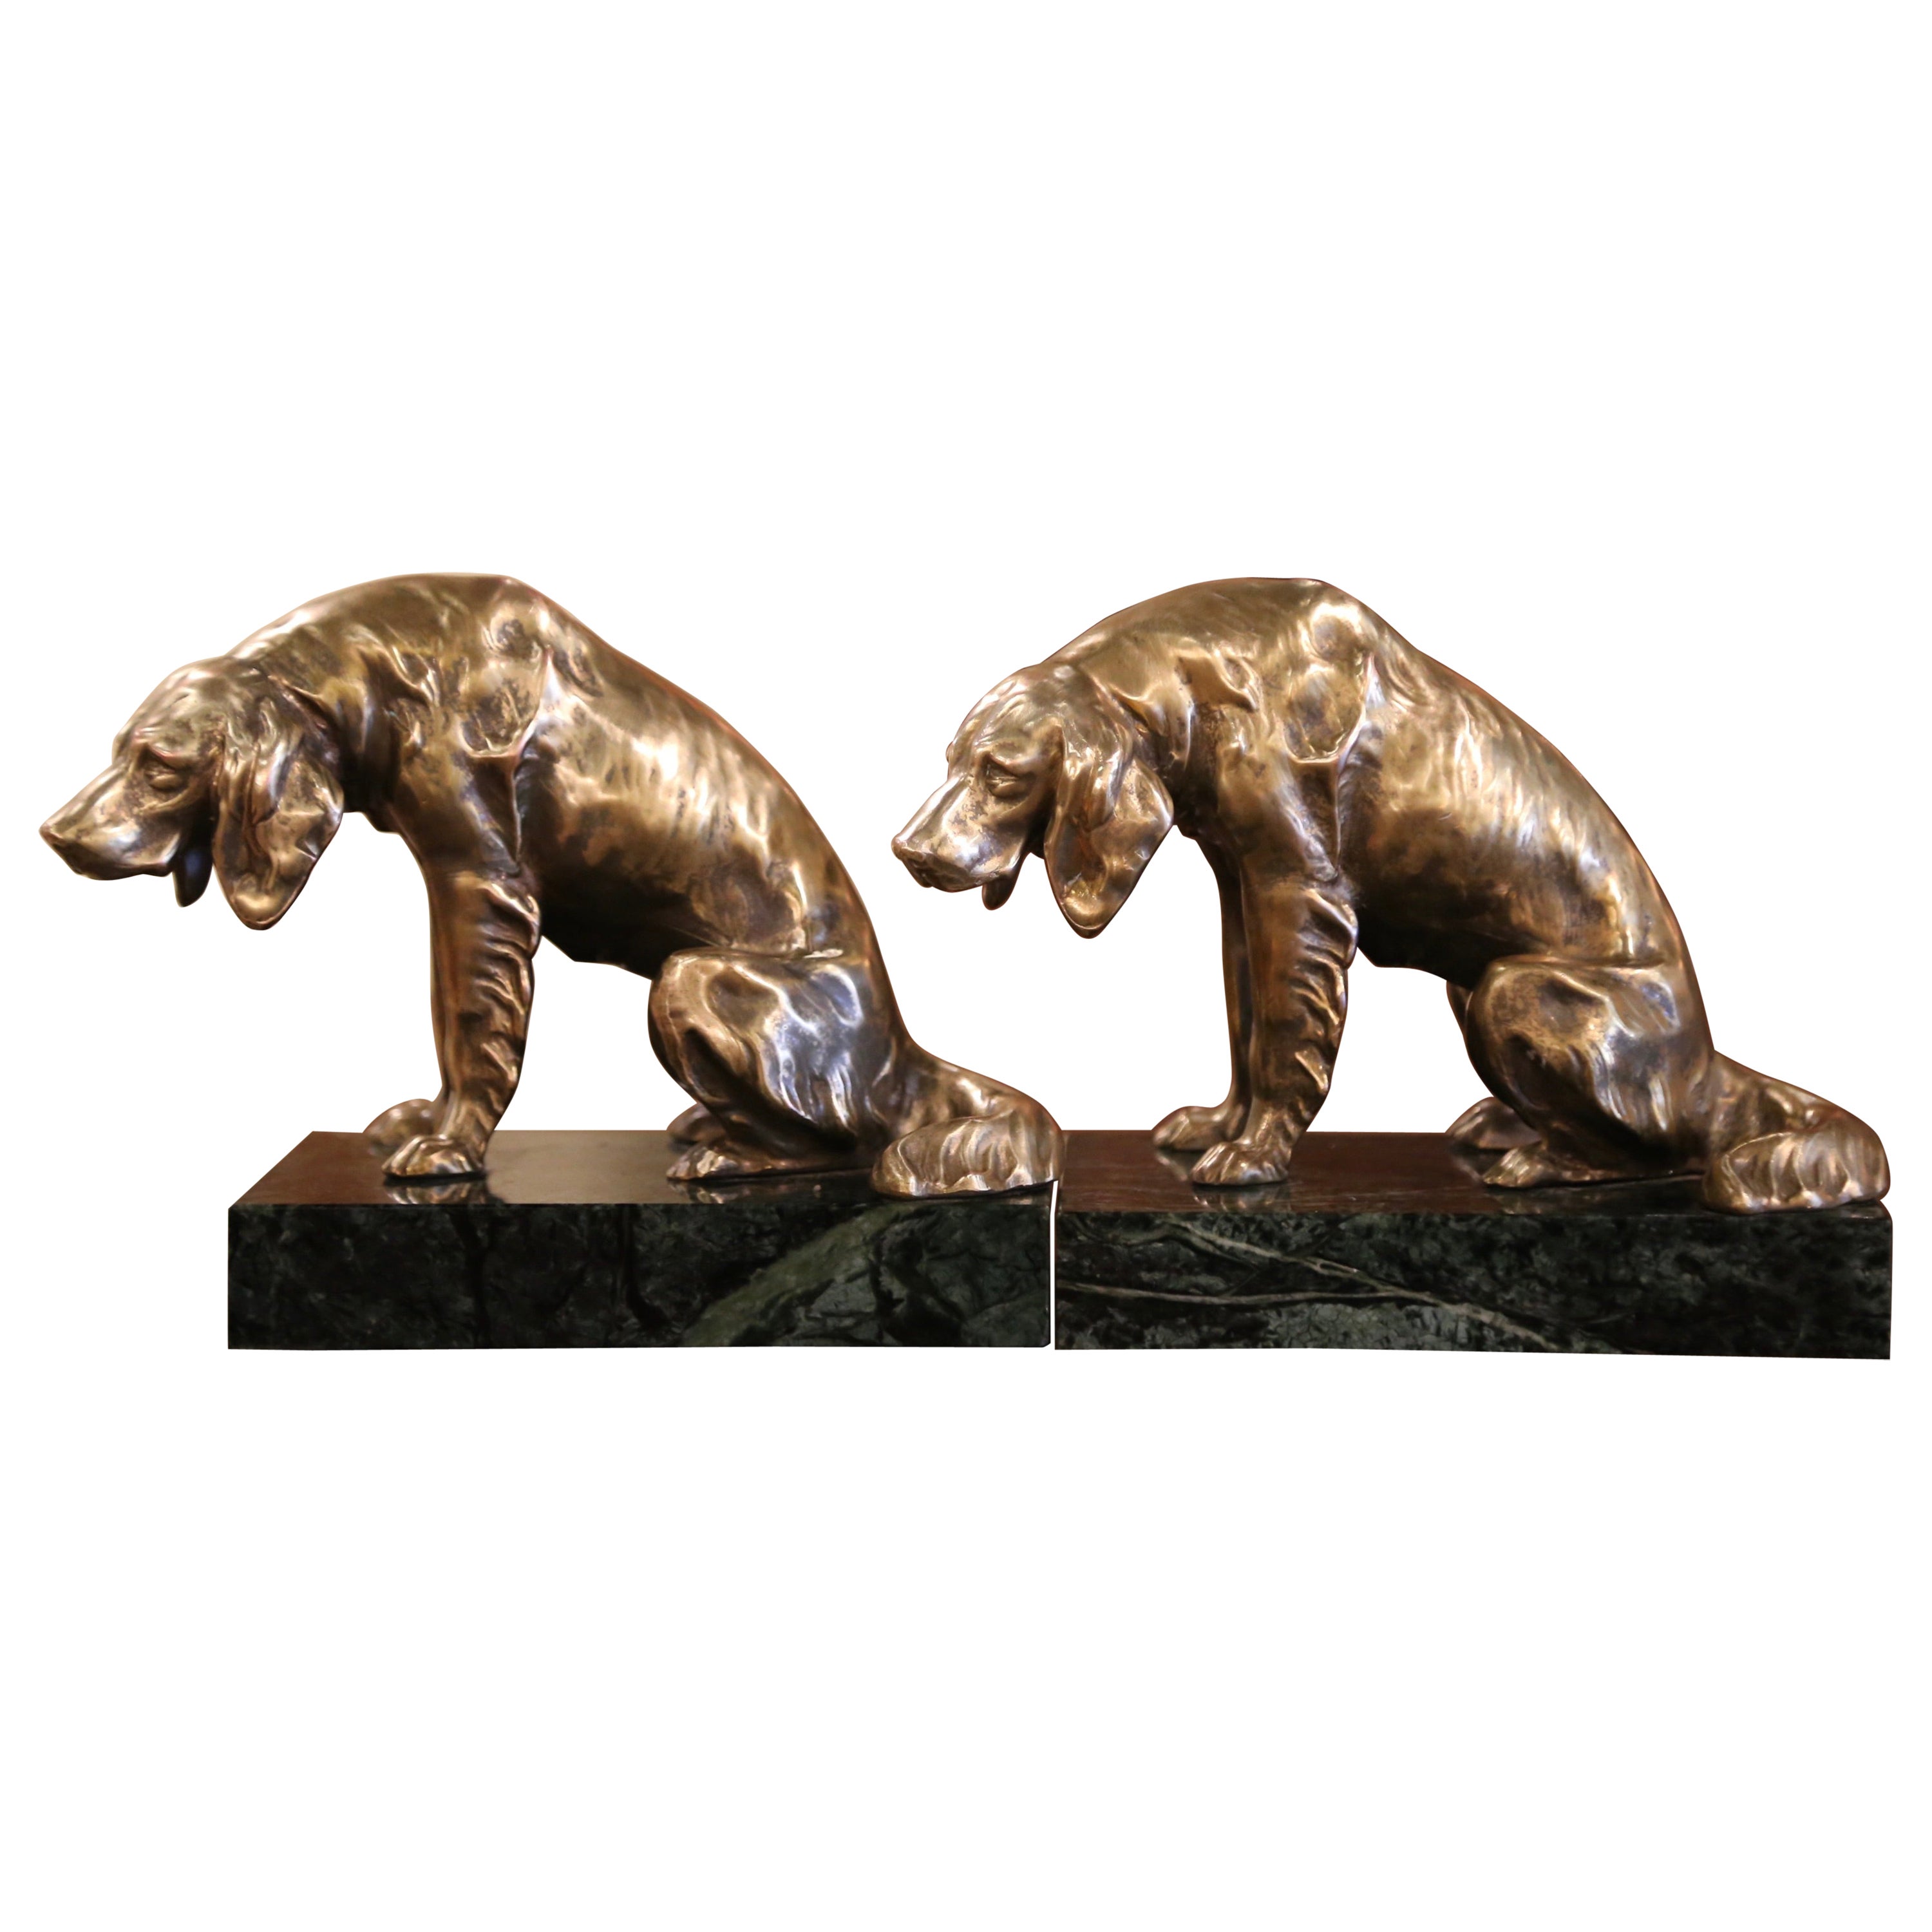 Pair of 19th Century Patinated Bronze and Marble Dog Sculpture Bookends